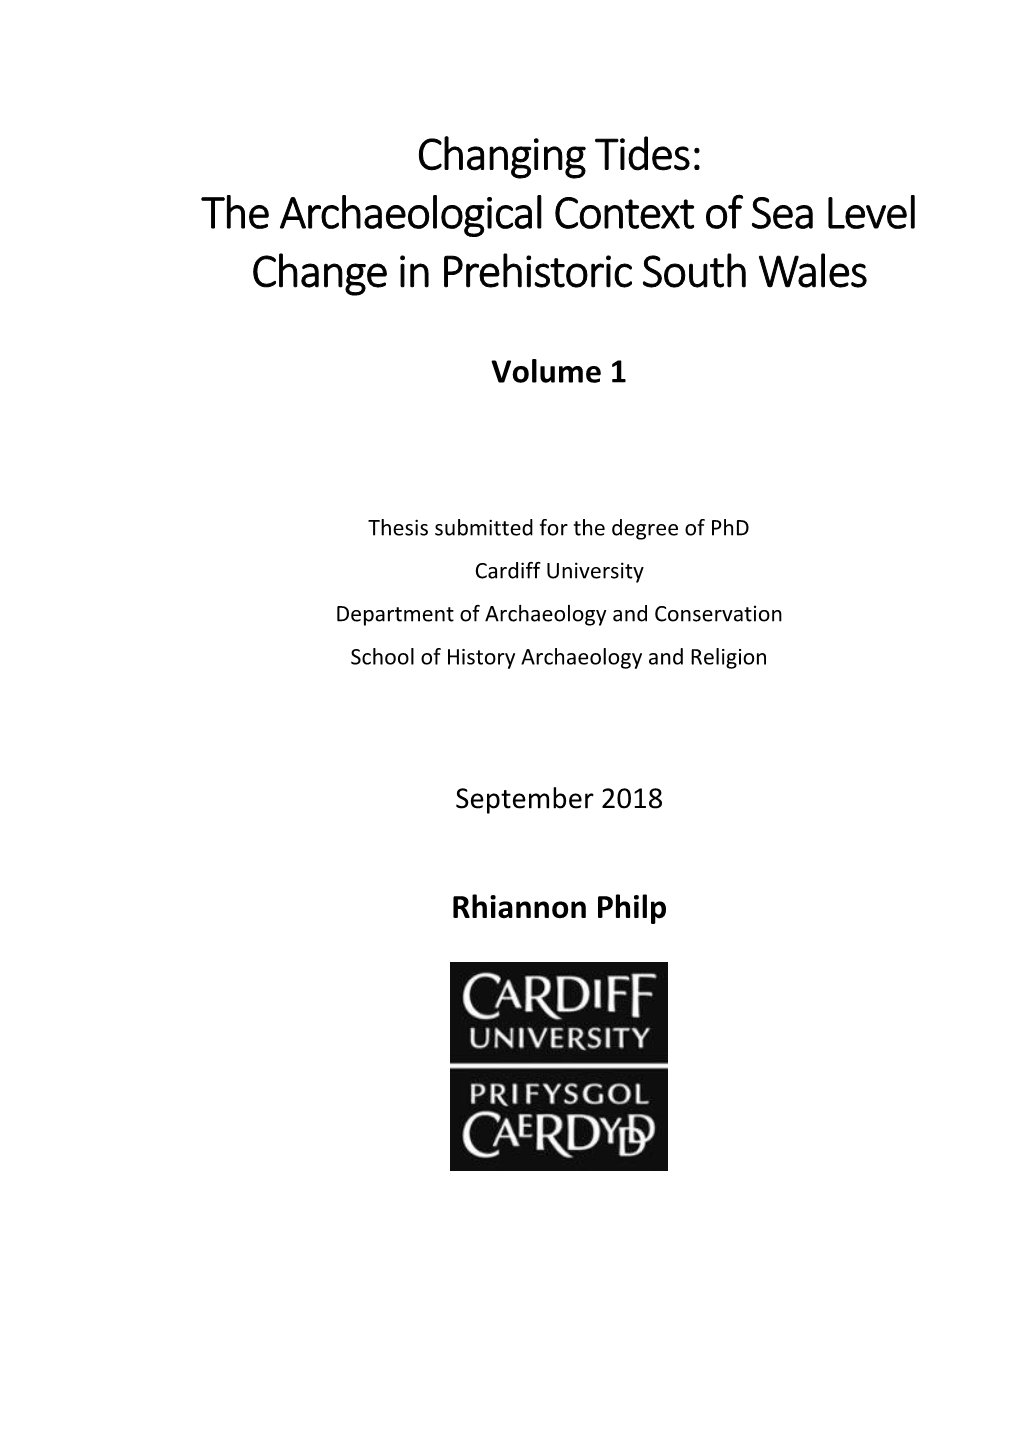 The Archaeological Context of Sea Level Change in Prehistoric South Wales